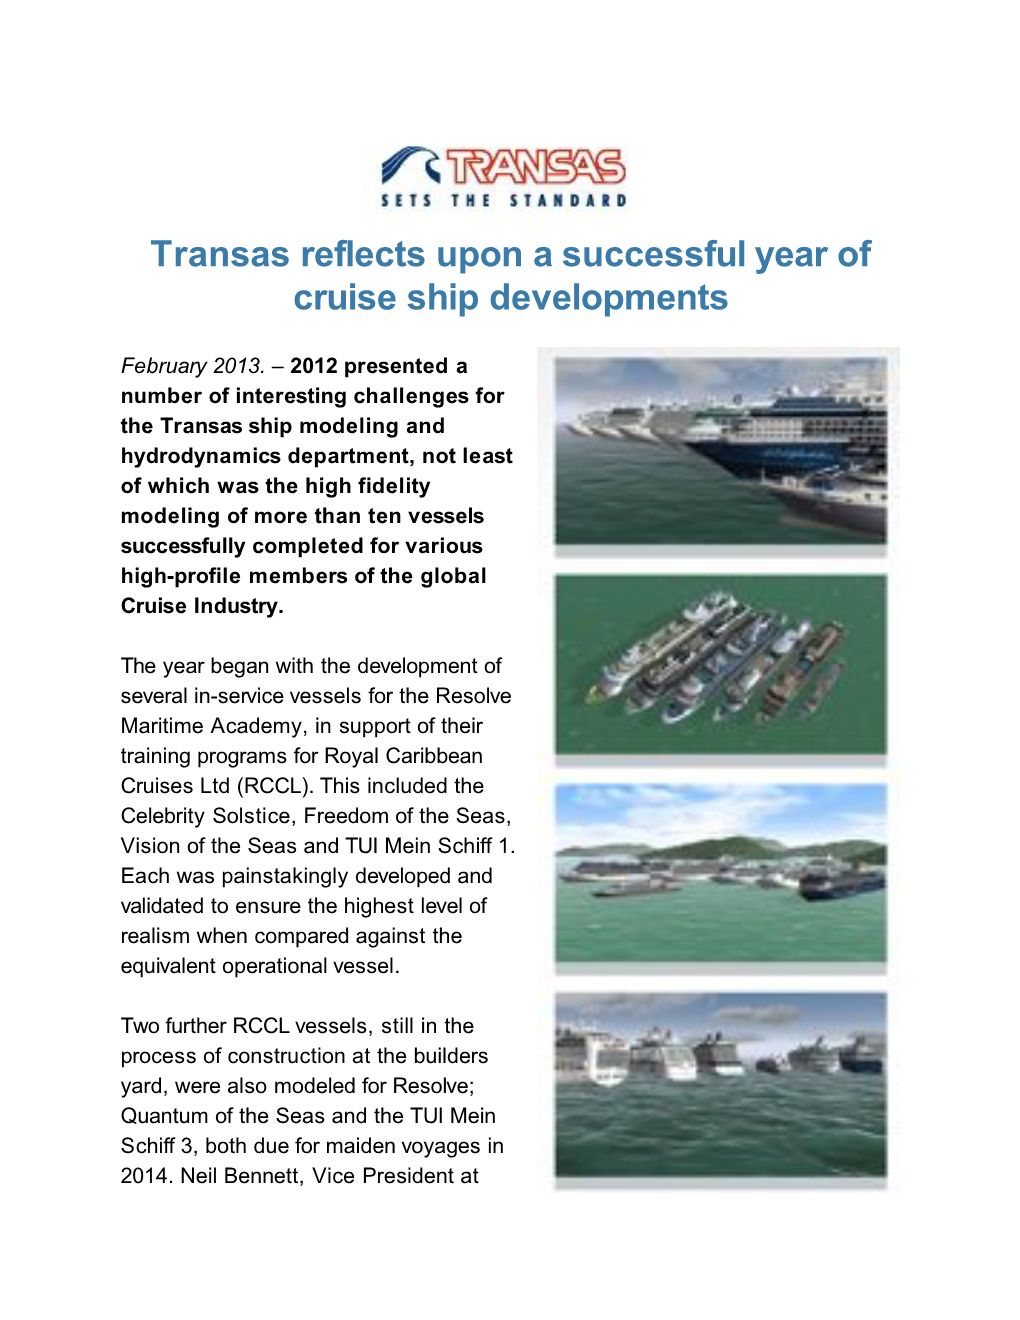 Transas Reflects Upon a Successful Year of Cruise Ship Developments